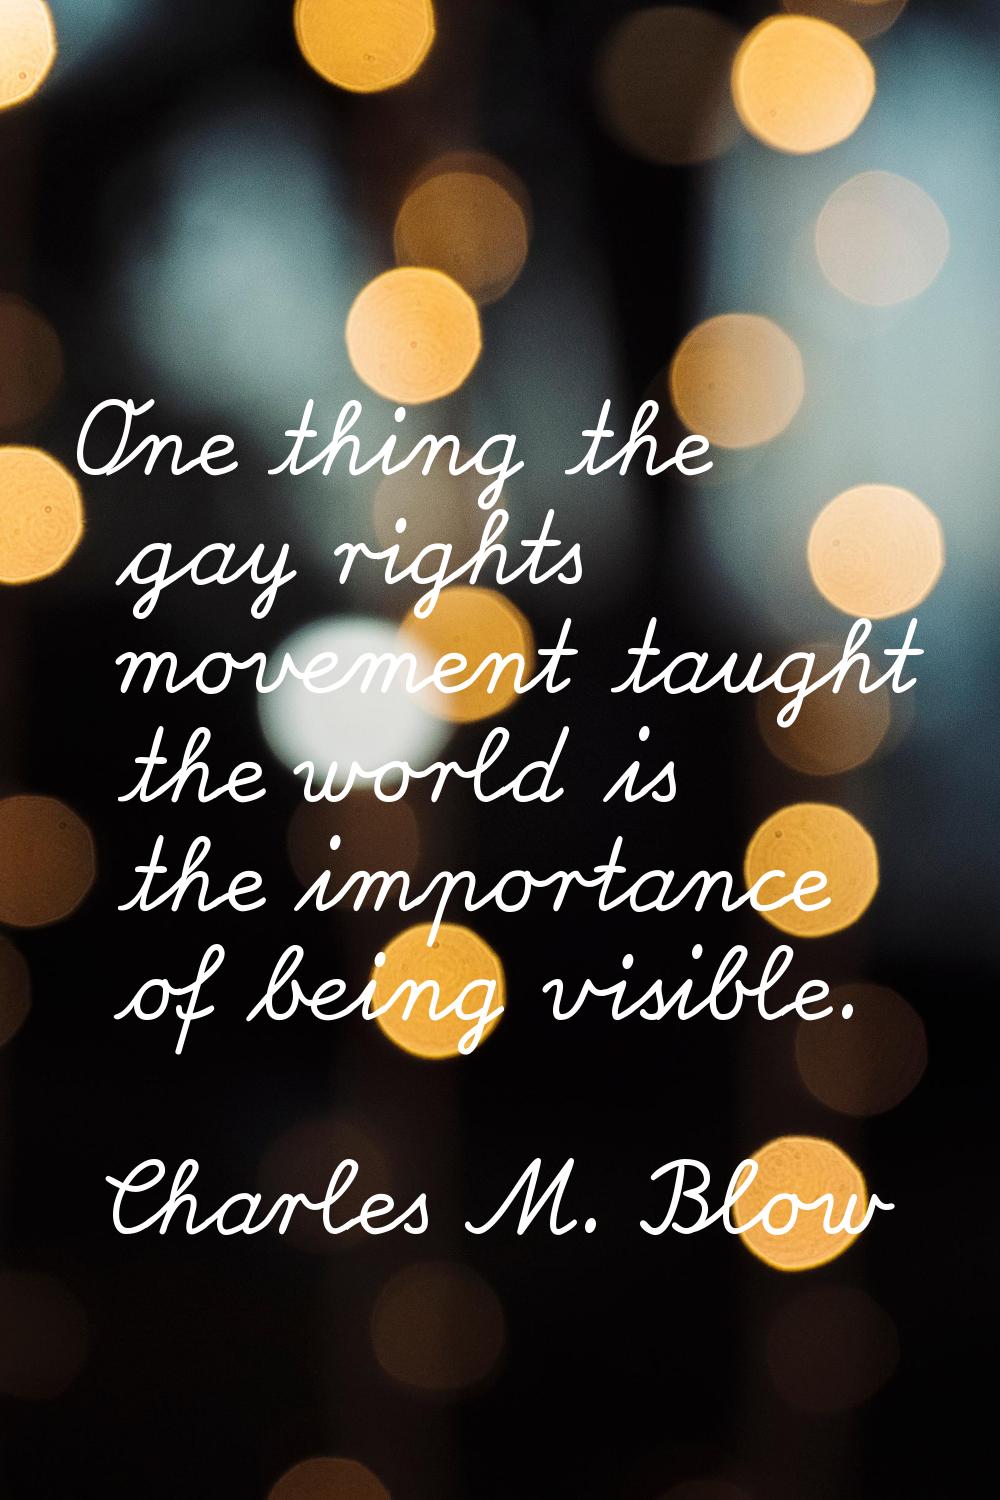 One thing the gay rights movement taught the world is the importance of being visible.